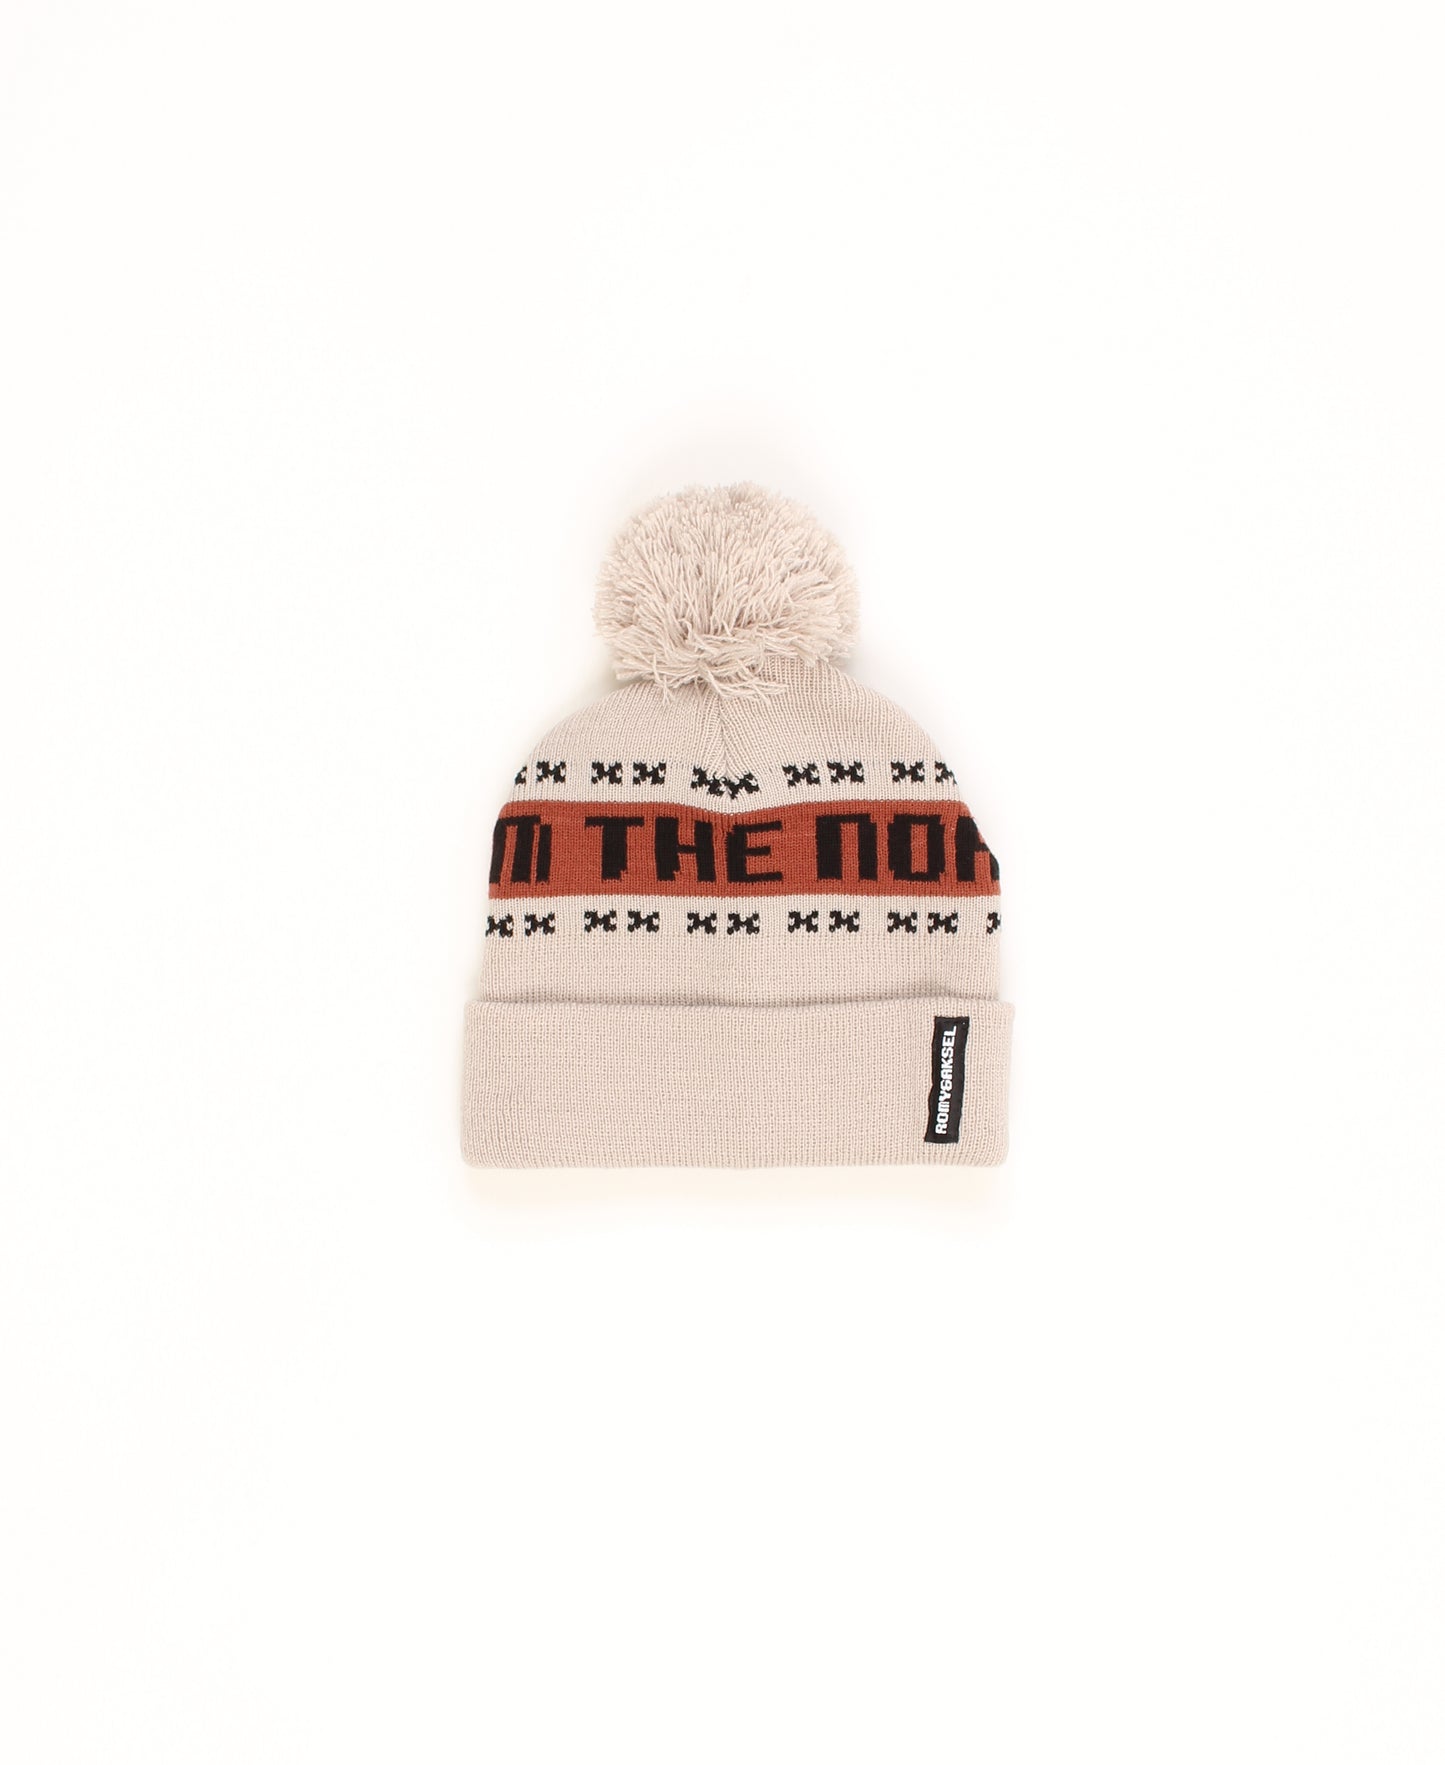 Tuque beige " From the north" - Romy & Aksel